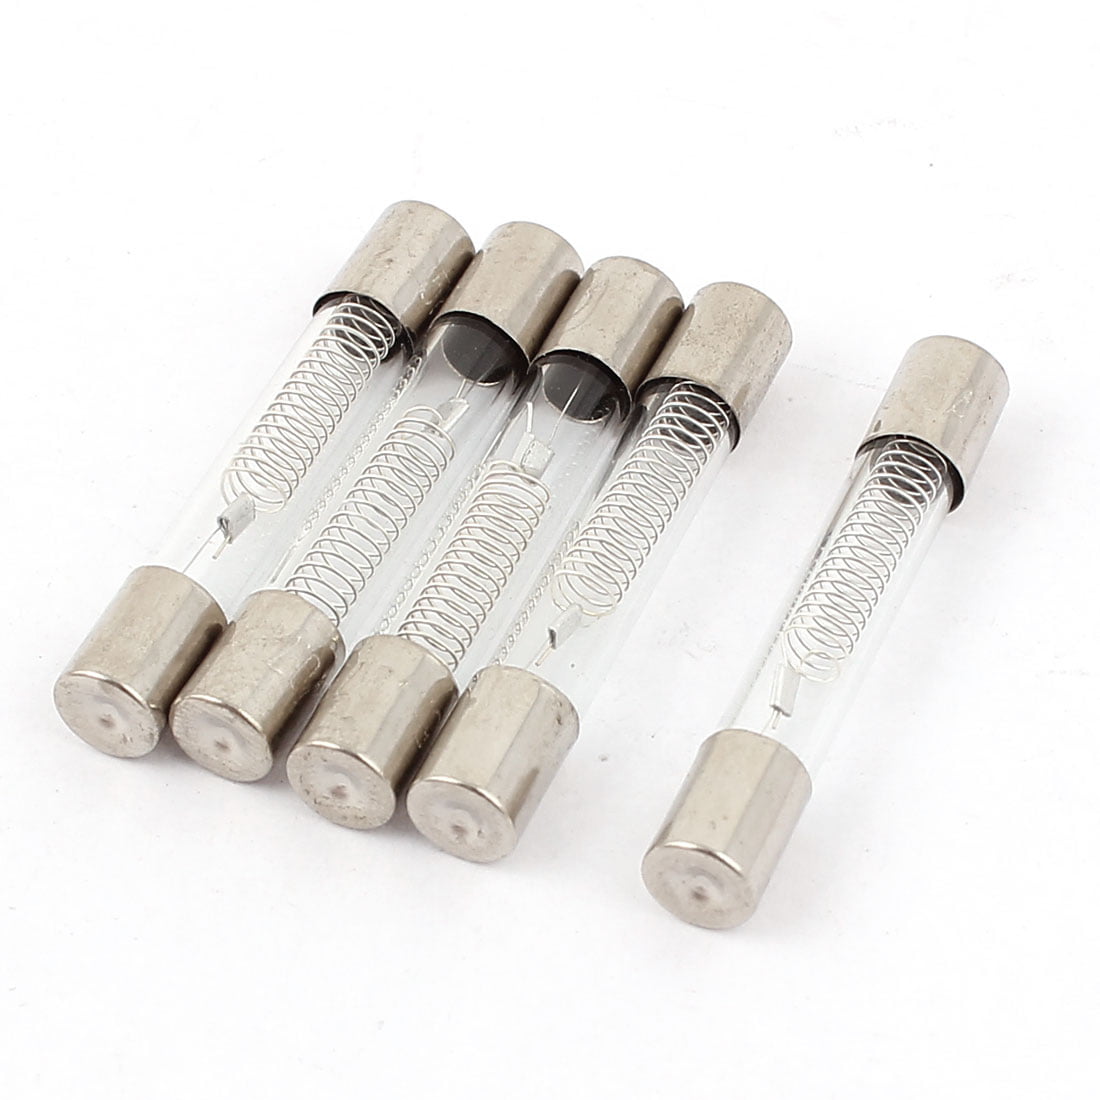 MICROWAVE OVEN High Voltage FUSES 0.75A 5KV 6X40mm 5 pieces USA SELLER